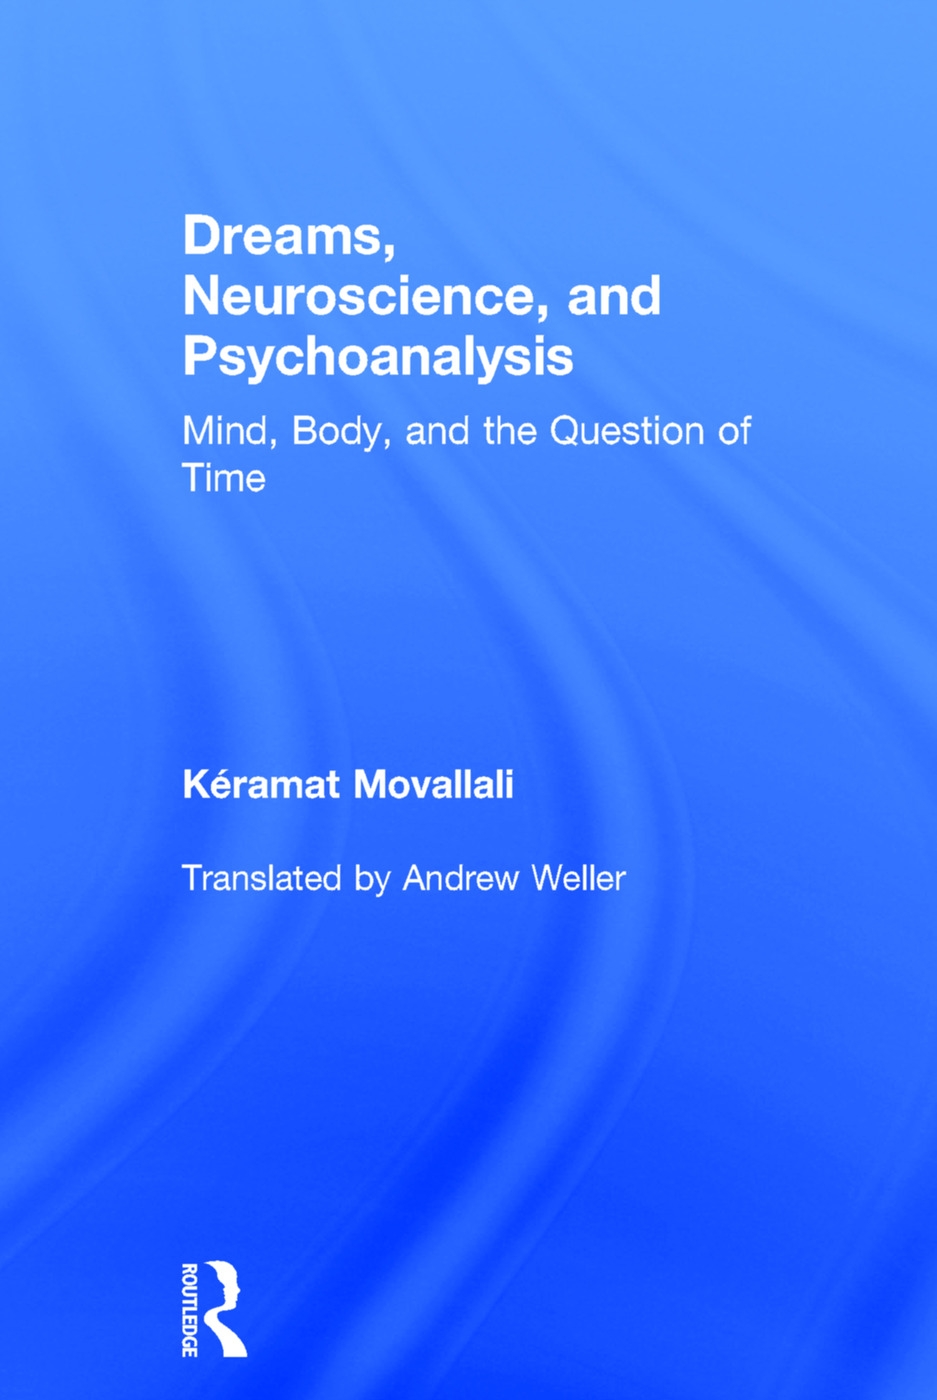 Dreams, Neuroscience, and Psychoanalysis: Mind, Body, and the Question of Time